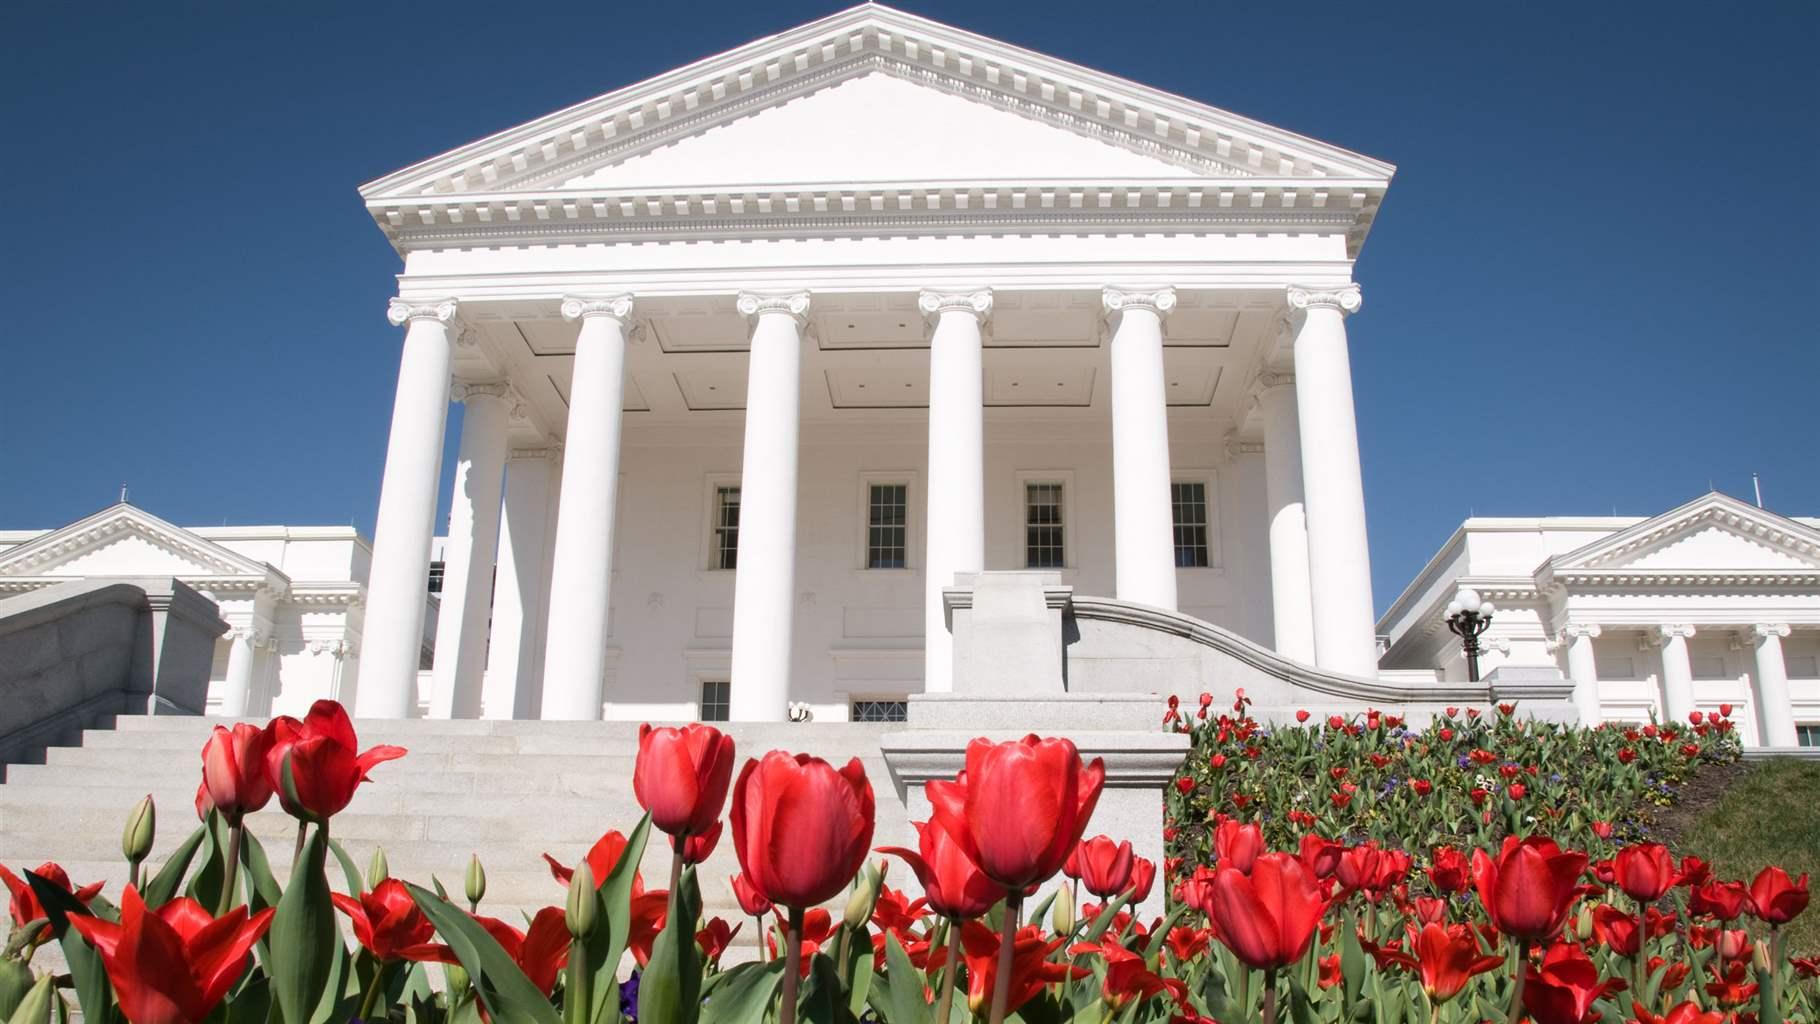 A large white statehouse and a long, wide set of concrete stairs leading up to it rise over a hillside with a garden of red tulips blooming. The sky is cloudless and deep blue.